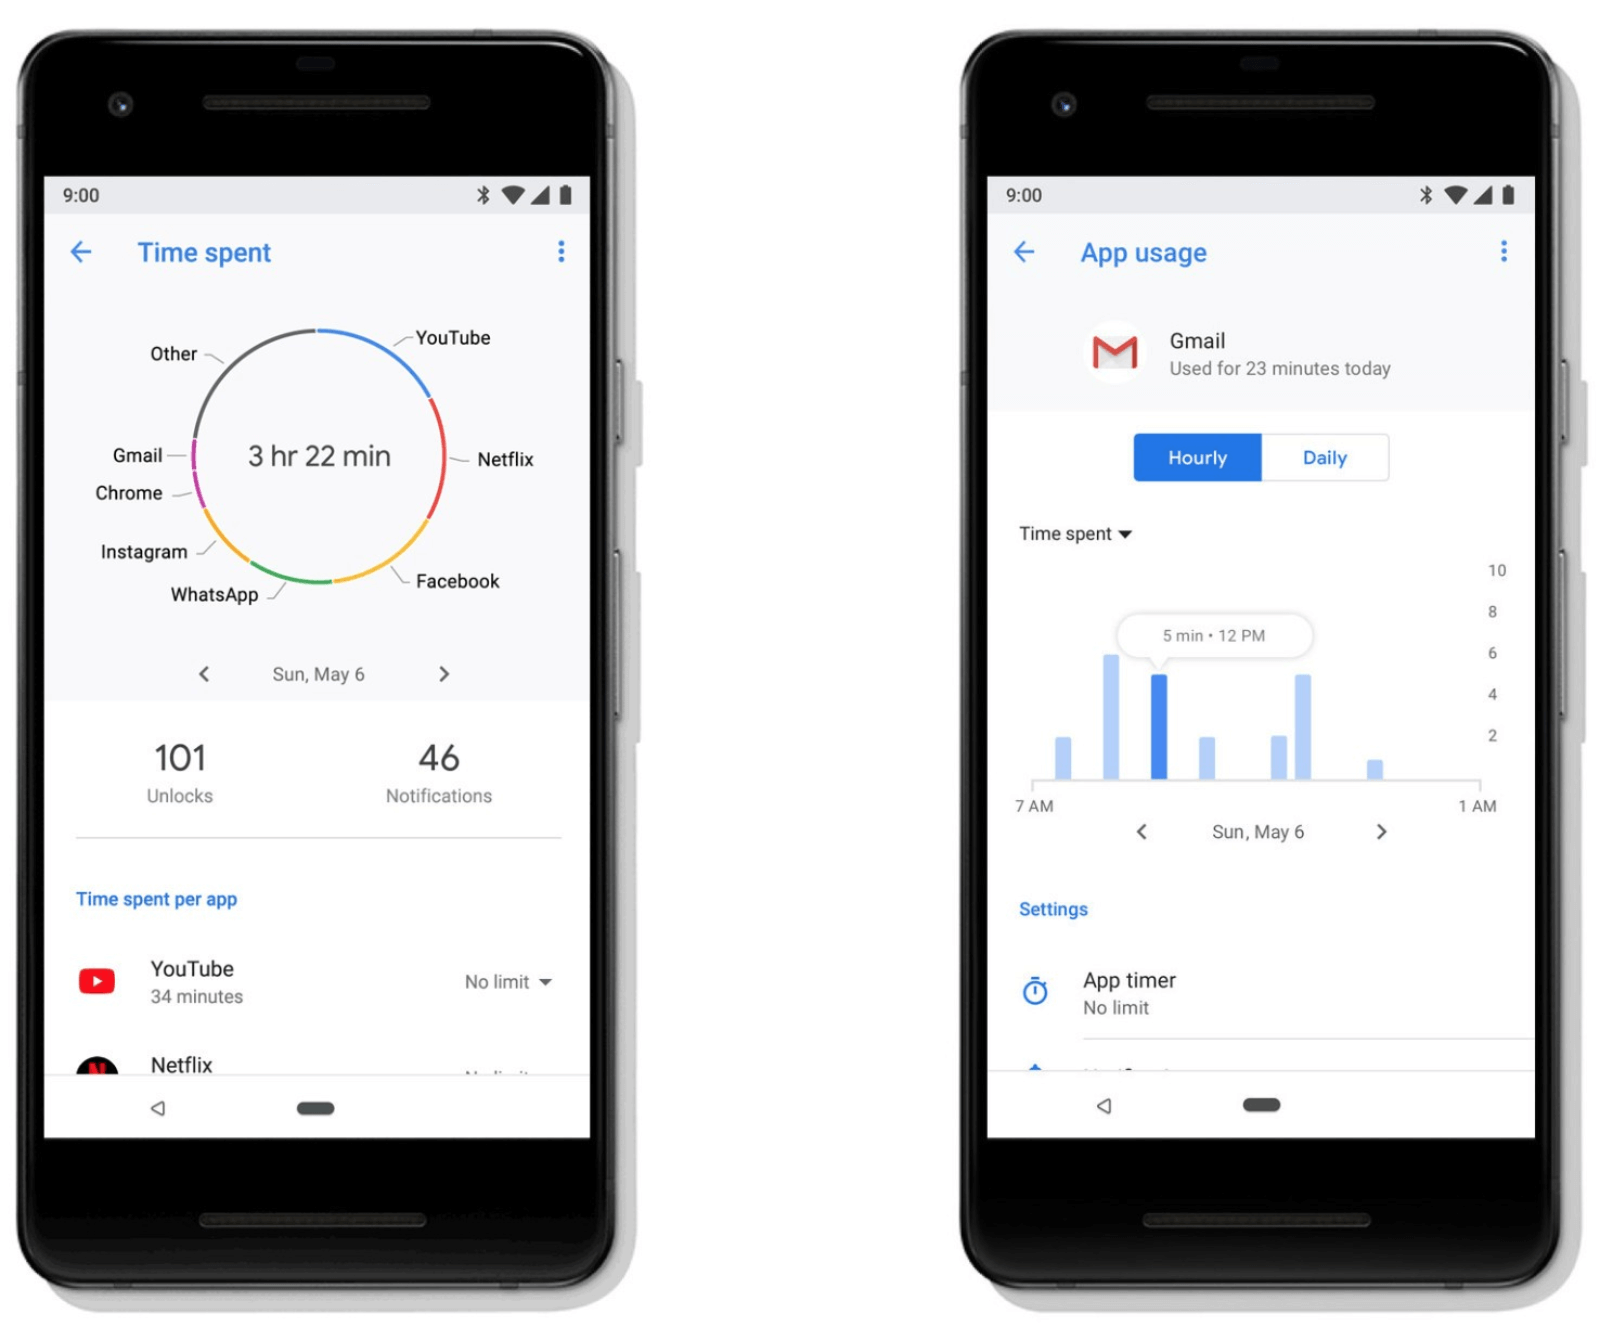 Google responds to its Digital Wellbeing feature affecting Pixel phones